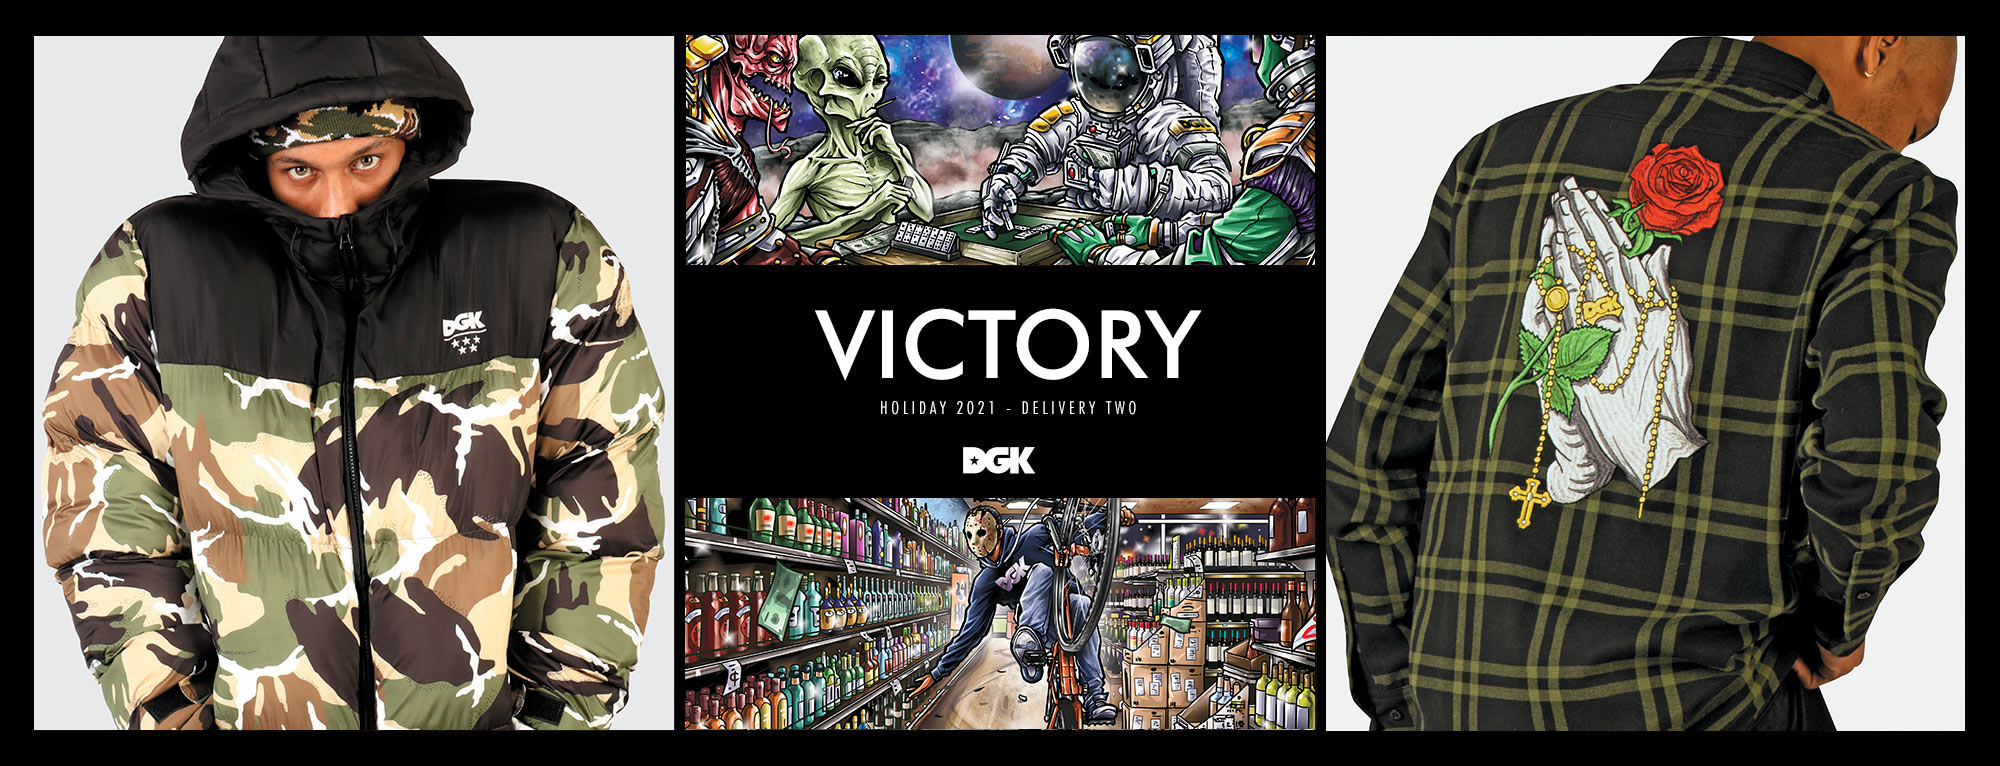 DGK Holiday 2021 Victory Collection